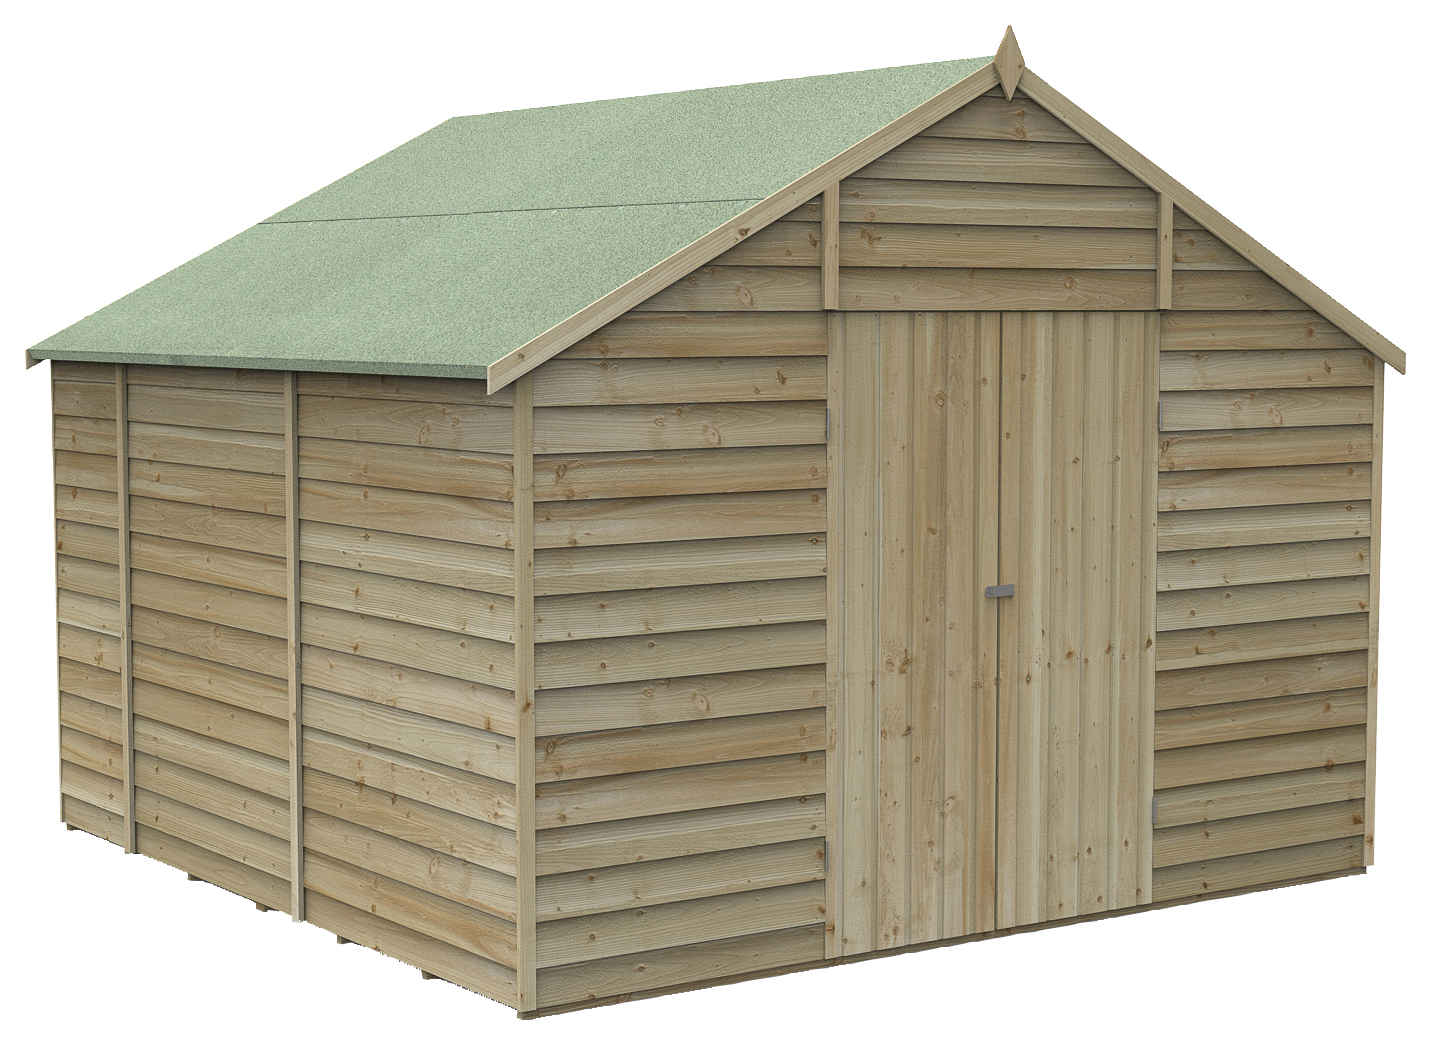 Image of Forest Garden 10 x 10ft 4Life Apex Overlap Pressure Treated Double Door Windowless Shed with Base and Assembly